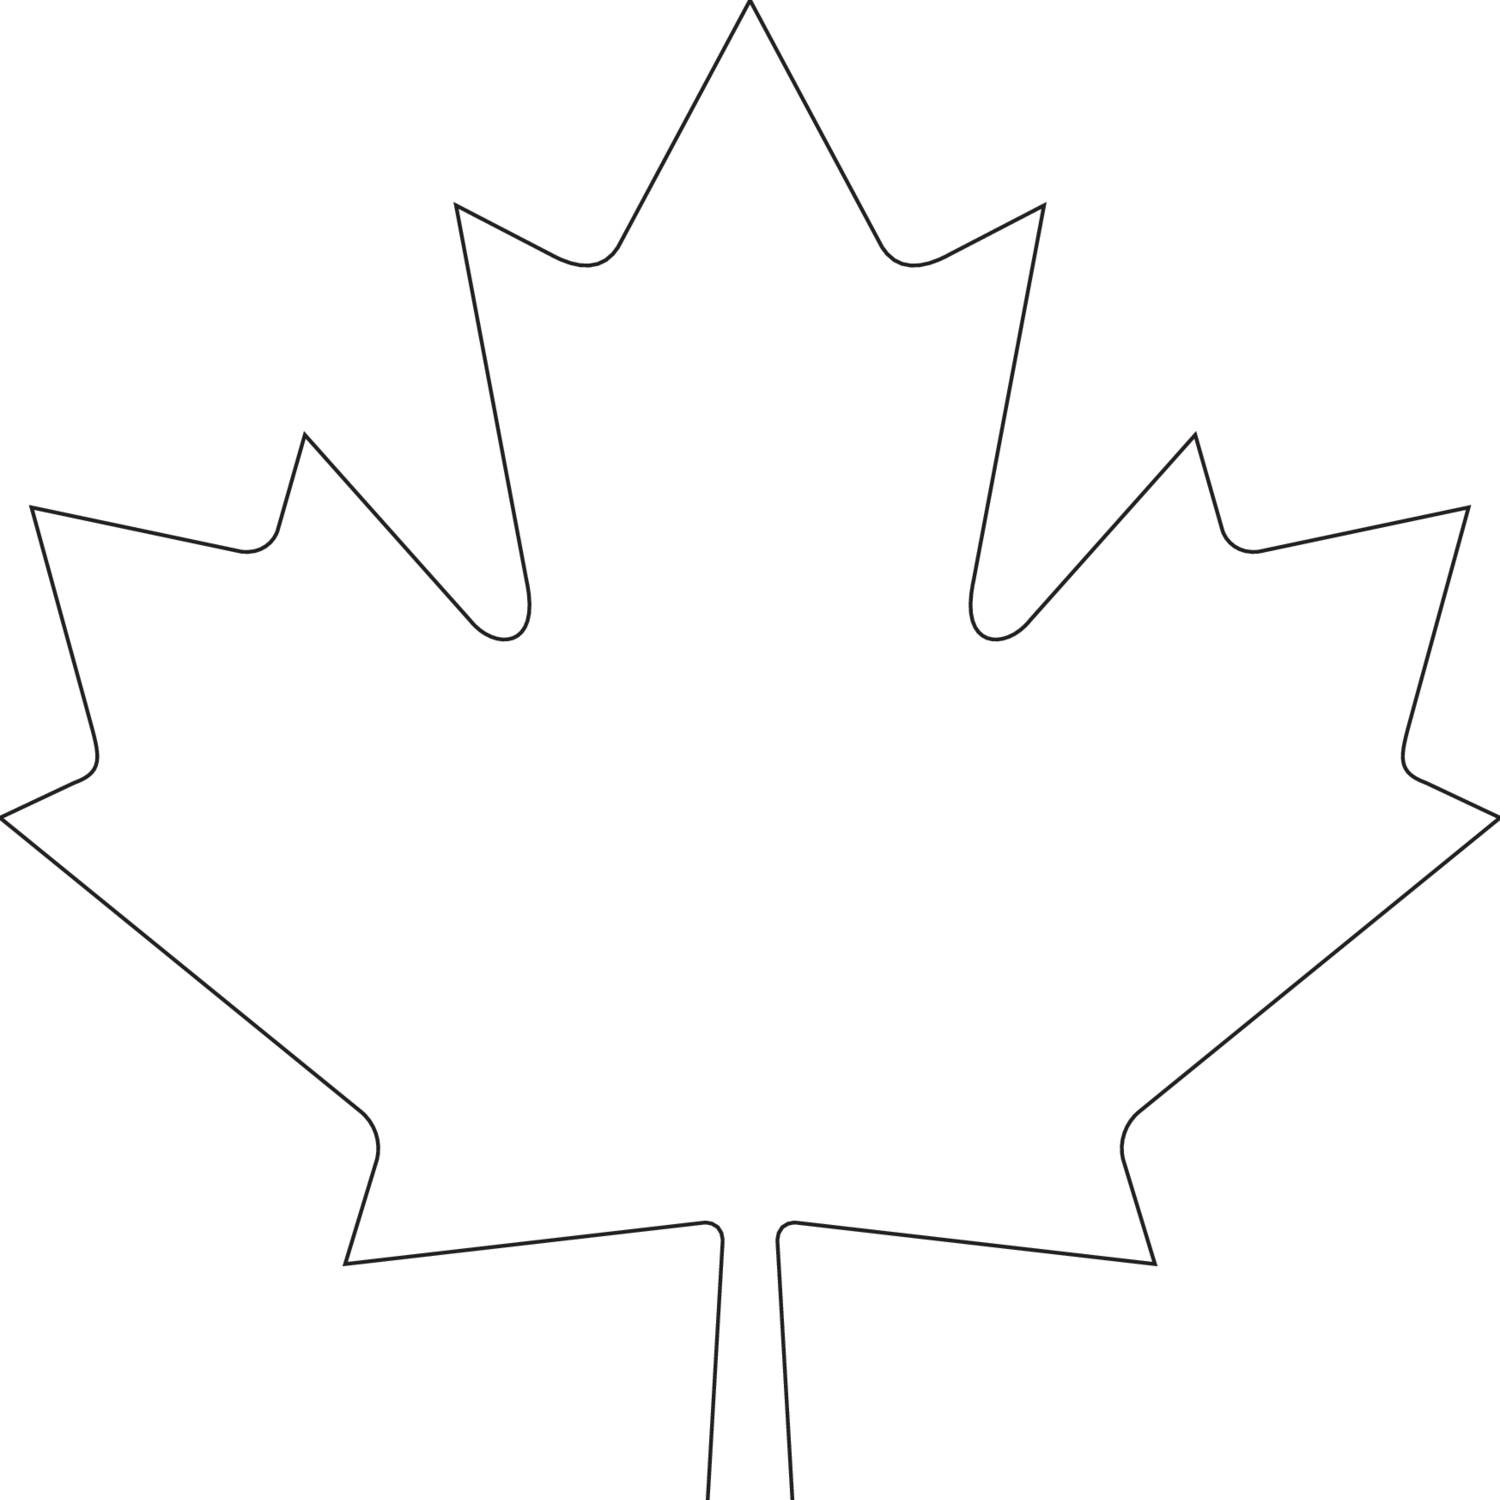 Canada Day maple leaf template.pdf DocDroid